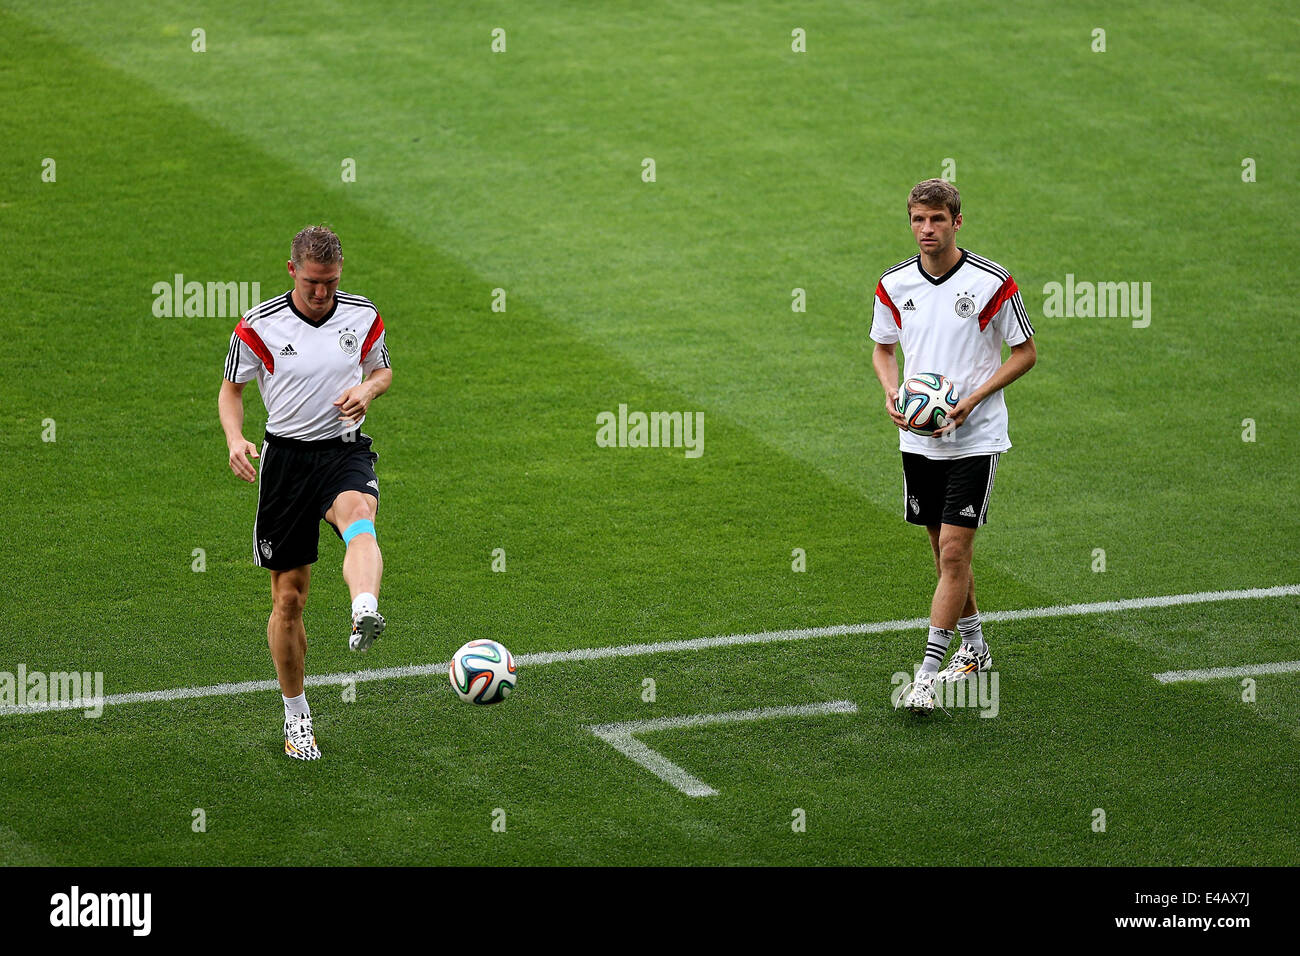 Belo Horizonte, Brazil. 7th July, 2014. Bastian Schweinsteiger (L) and Thomas Muller 0f Germany take part in a training session in Belo Horizonte, Brazil, on July 7, 2014. Germany will play Brazil in their 2014 World Cup semifinal here on July 8. © Li Ming/Xinhua/Alamy Live News Stock Photo